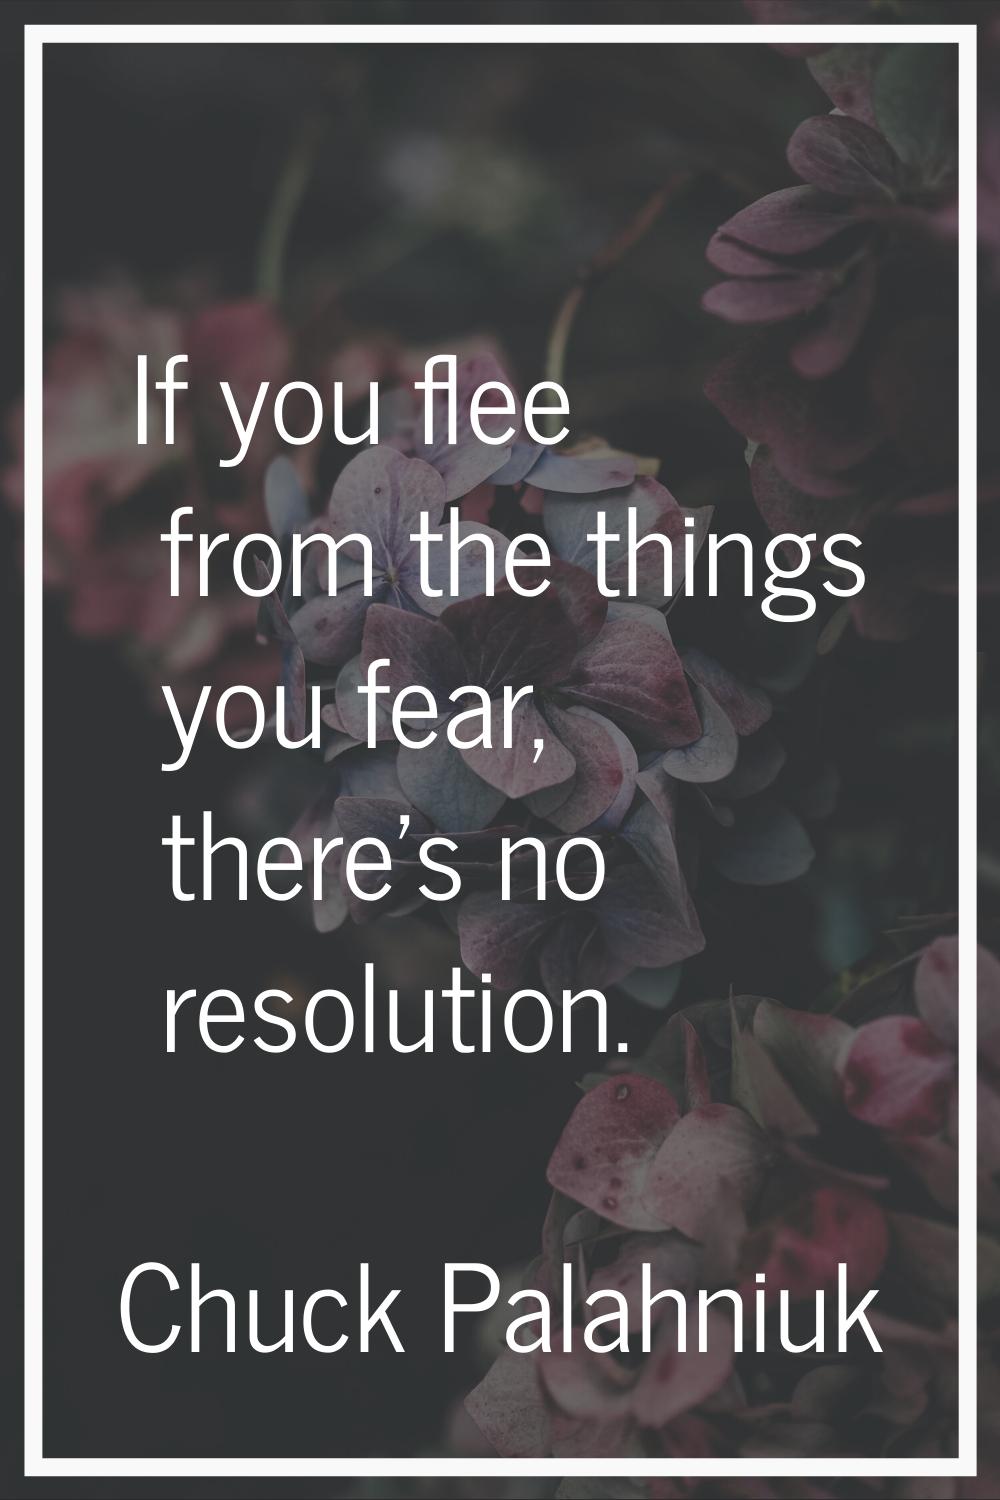 If you flee from the things you fear, there's no resolution.